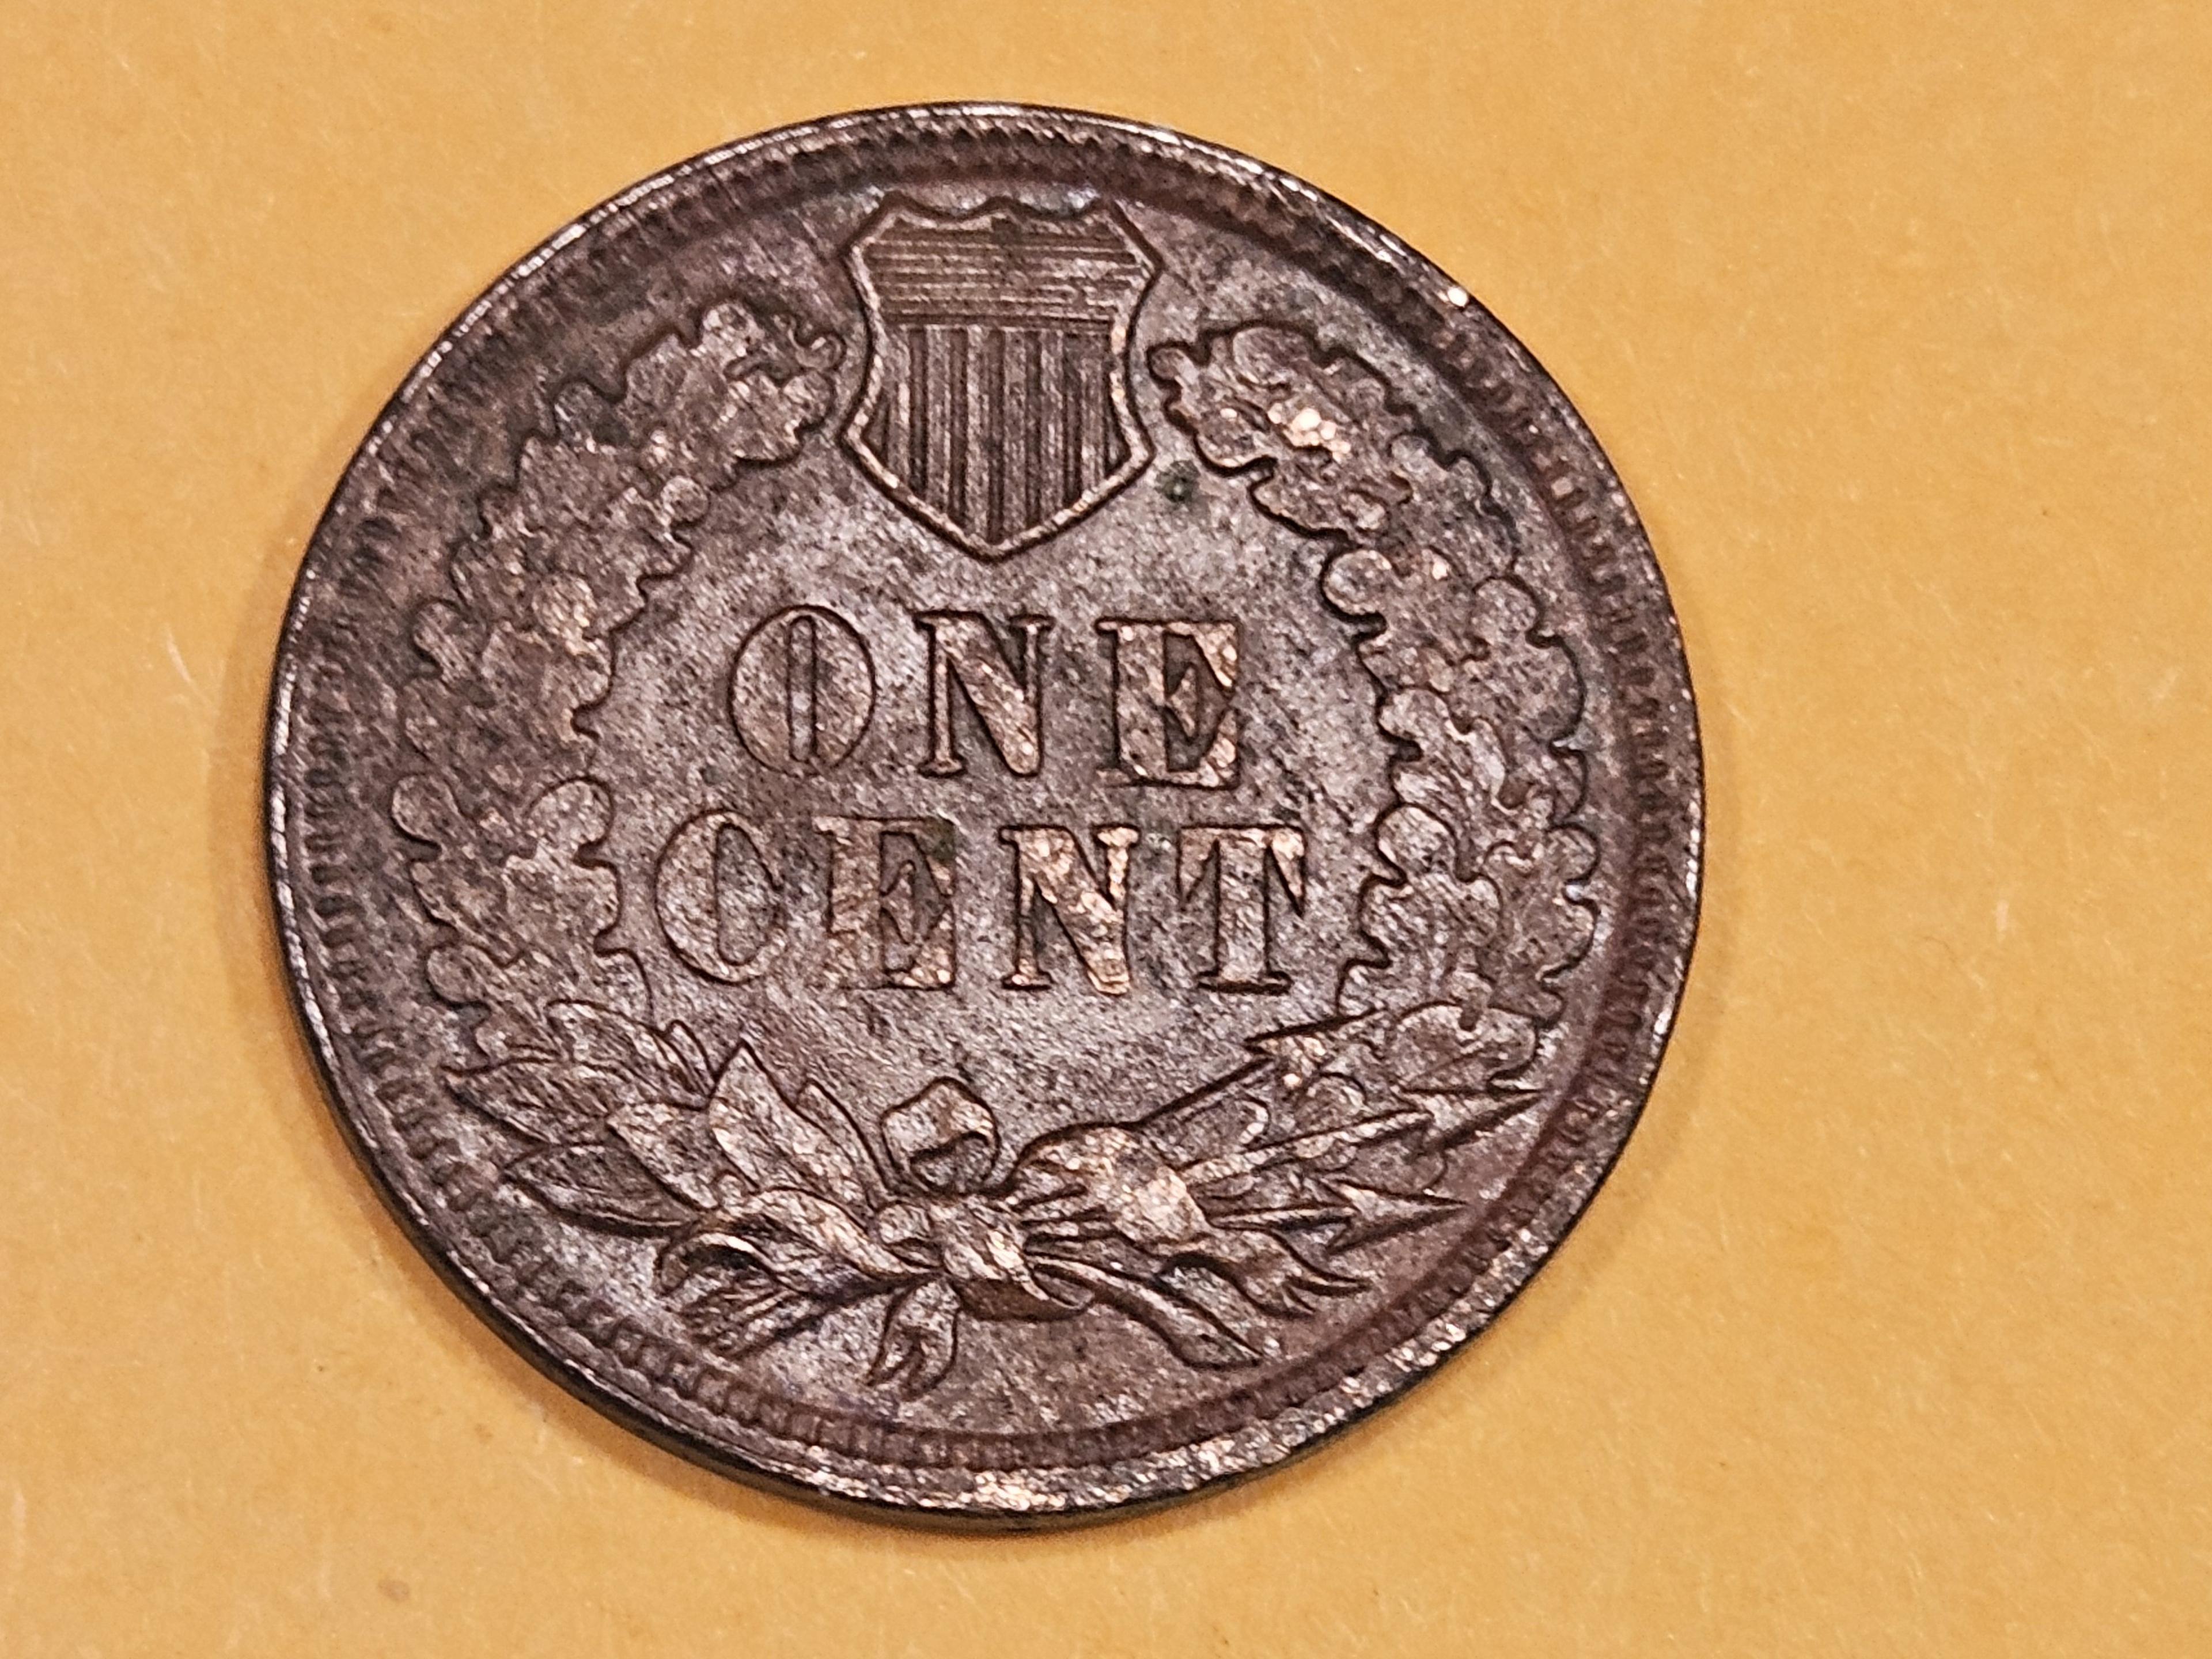 1879 Indian Cent